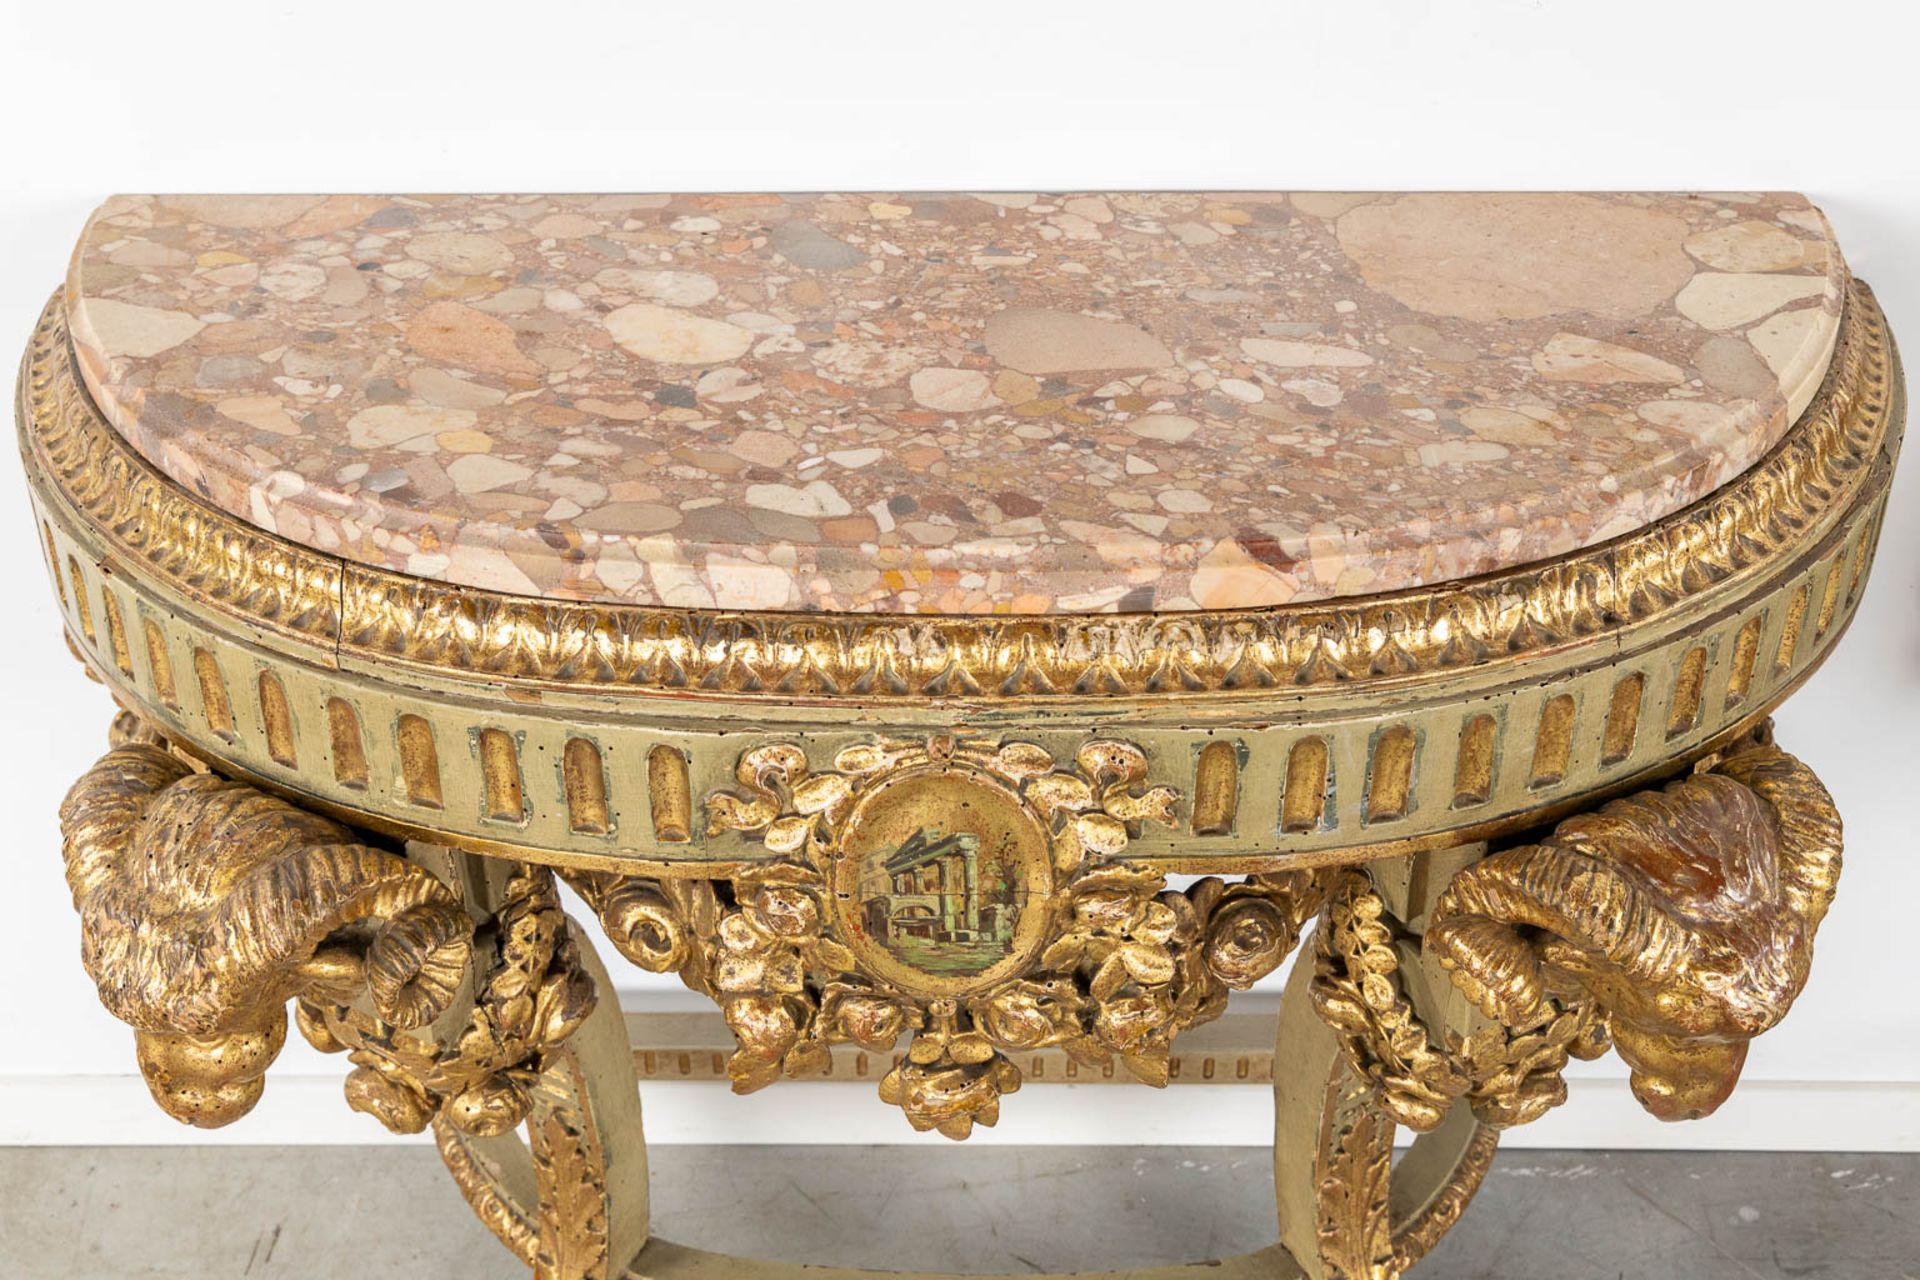 A pair of console tables with ram's heads, Louis XVI style, Italy, 19th C. (L:50 x W:110 x H:84 cm) - Image 8 of 10